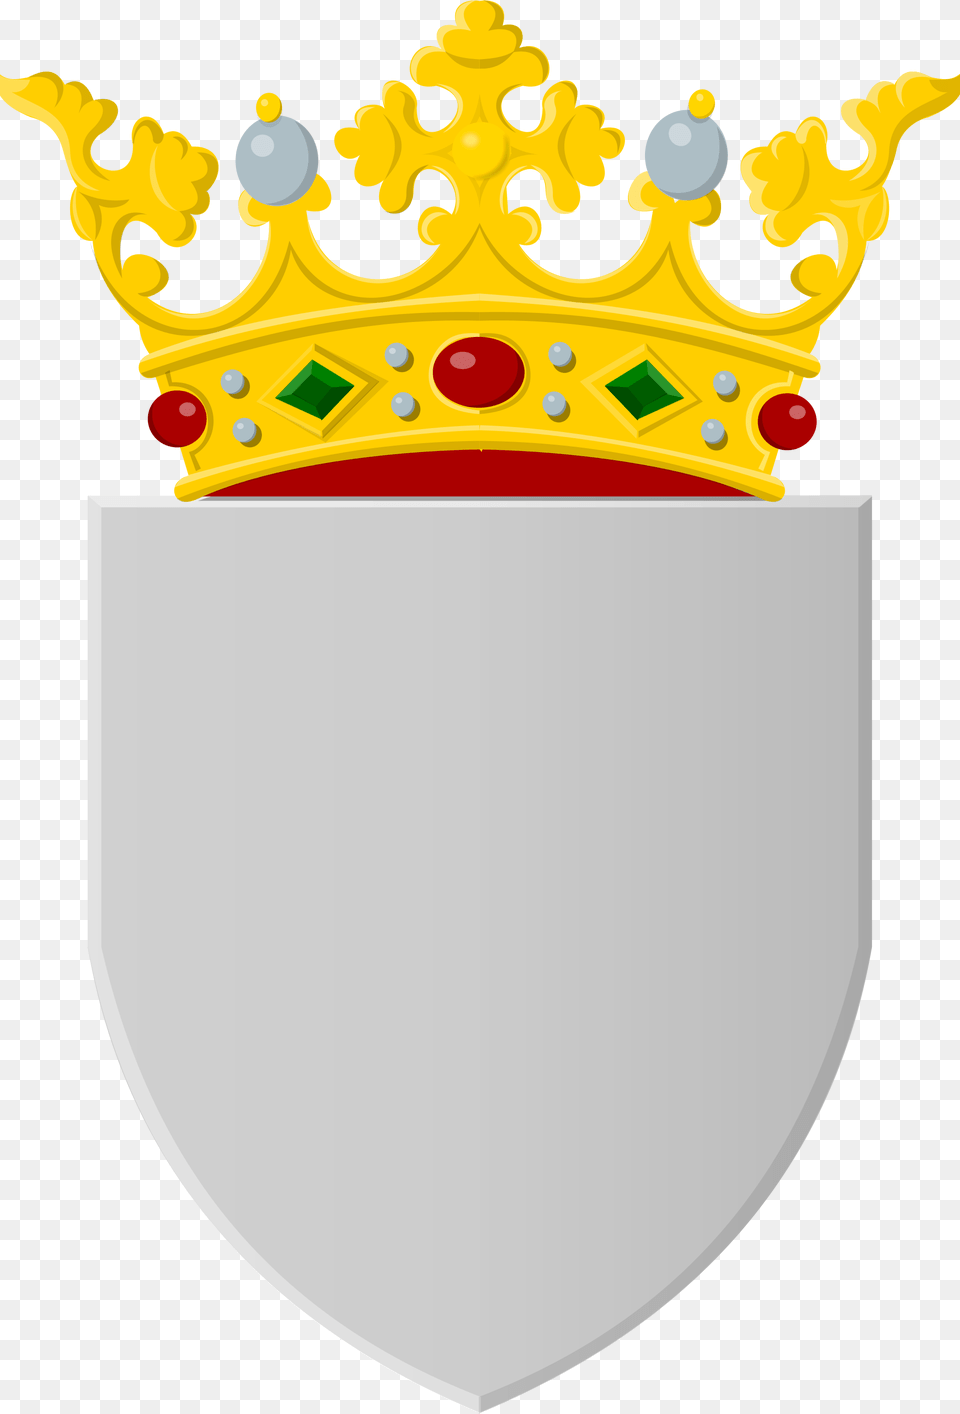 Silver Shield With Golden Crown Crown Shield, Accessories, Jewelry Free Transparent Png